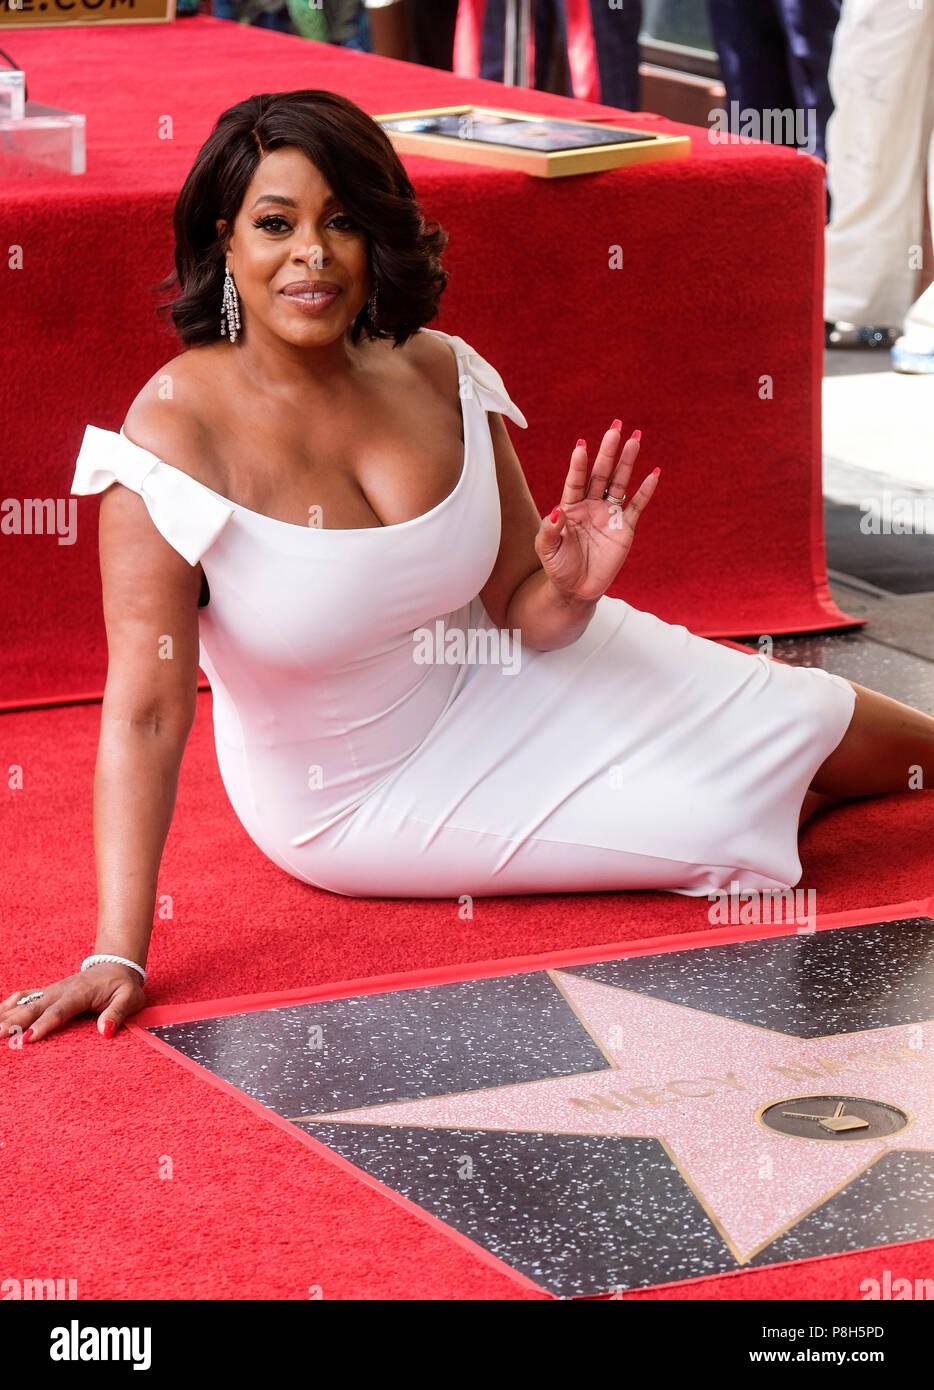 Los Angeles, USA. 11th July, 2018. American actress Niecy Nash attends her star dedication ceremony at the Hollywood Walk of Fame in Los Angeles, the United States, on July 11, 2018. Credit: Zhao Hanrong/Xinhua/Alamy Live News Stock Photo